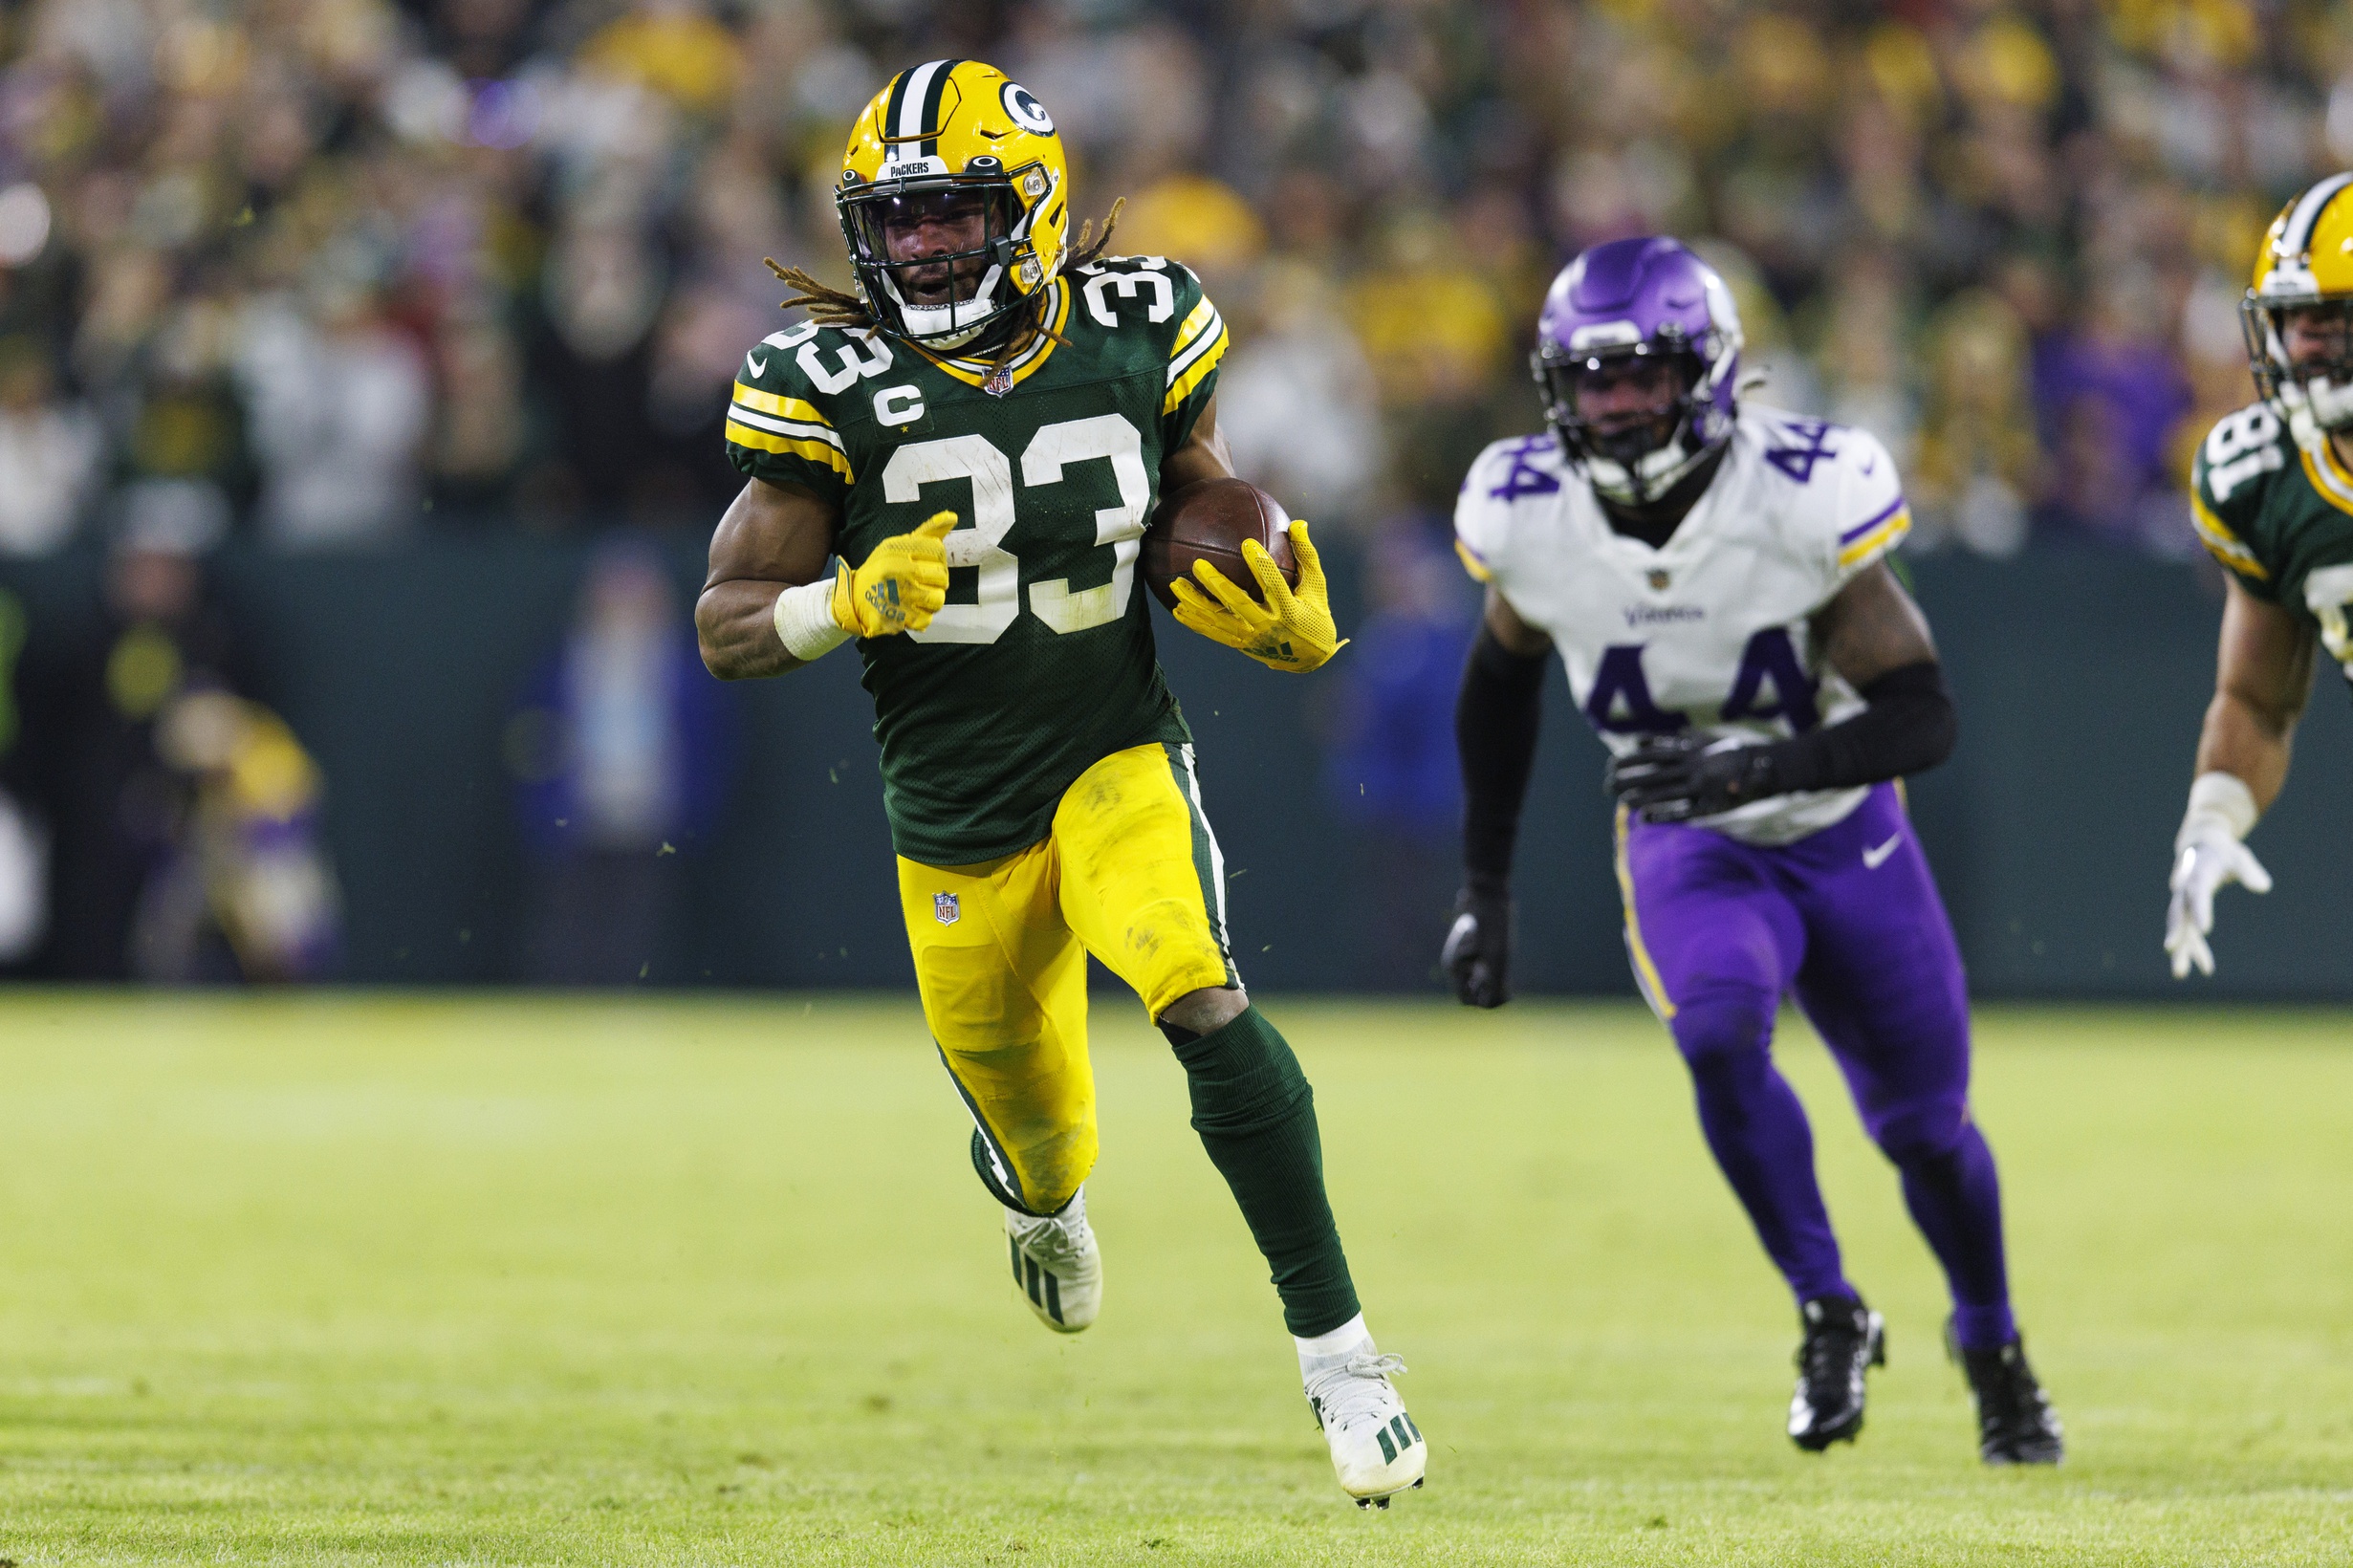 PFF - The Packers have big plans for Aaron Jones and A.J. Dillon